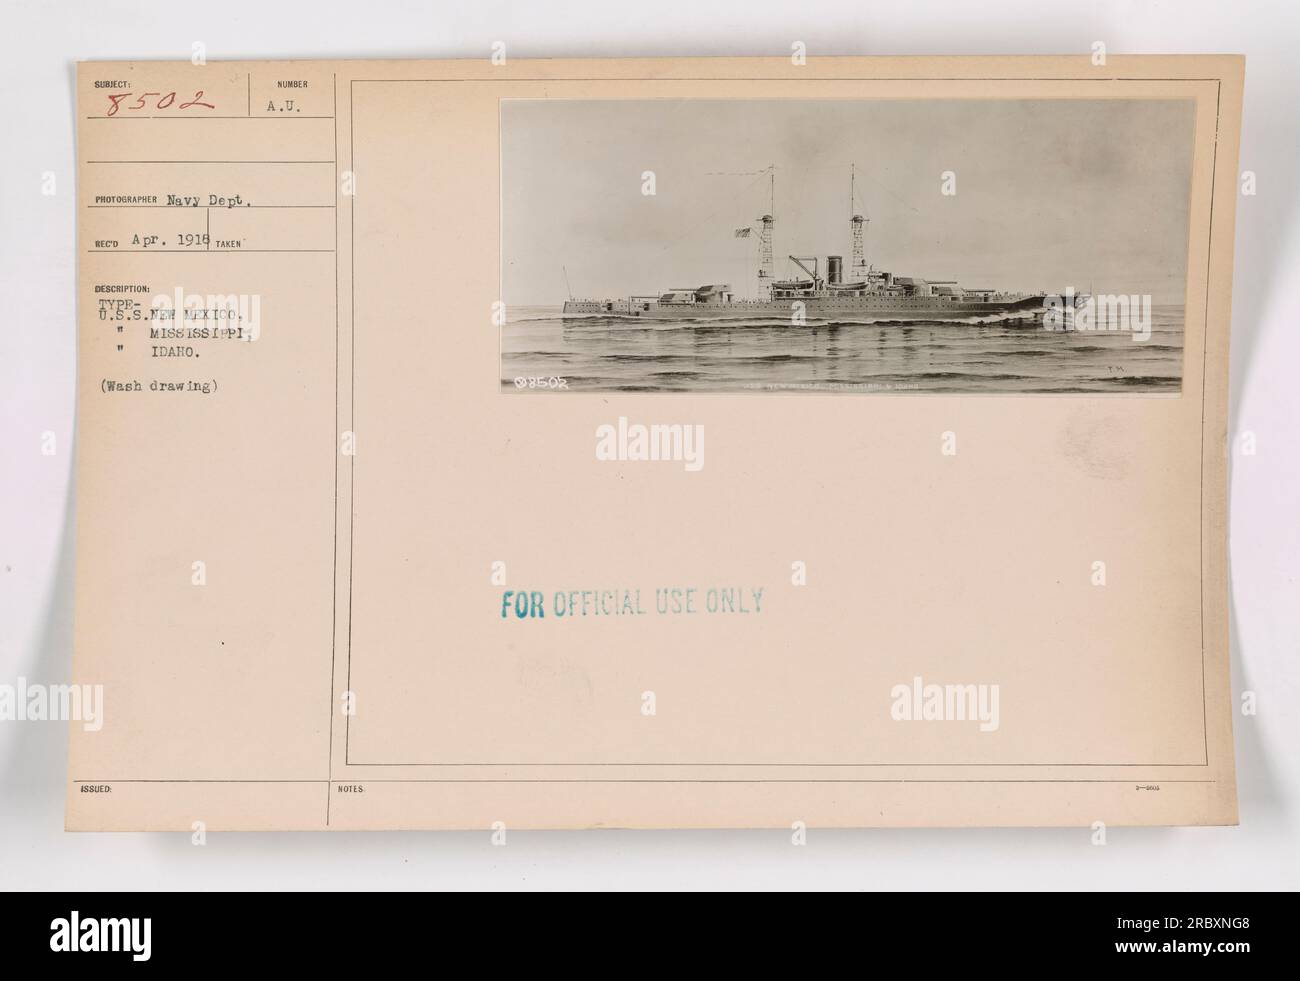 Navy Department photograph taken by the Navy, received in April 1918. The image is a wash drawing depicting the U.S.S. New Mexico, Mississippi, and Idaho. The assigned number for this photograph is A.U. It is marked as 'Notes for official use only.' Stock Photo